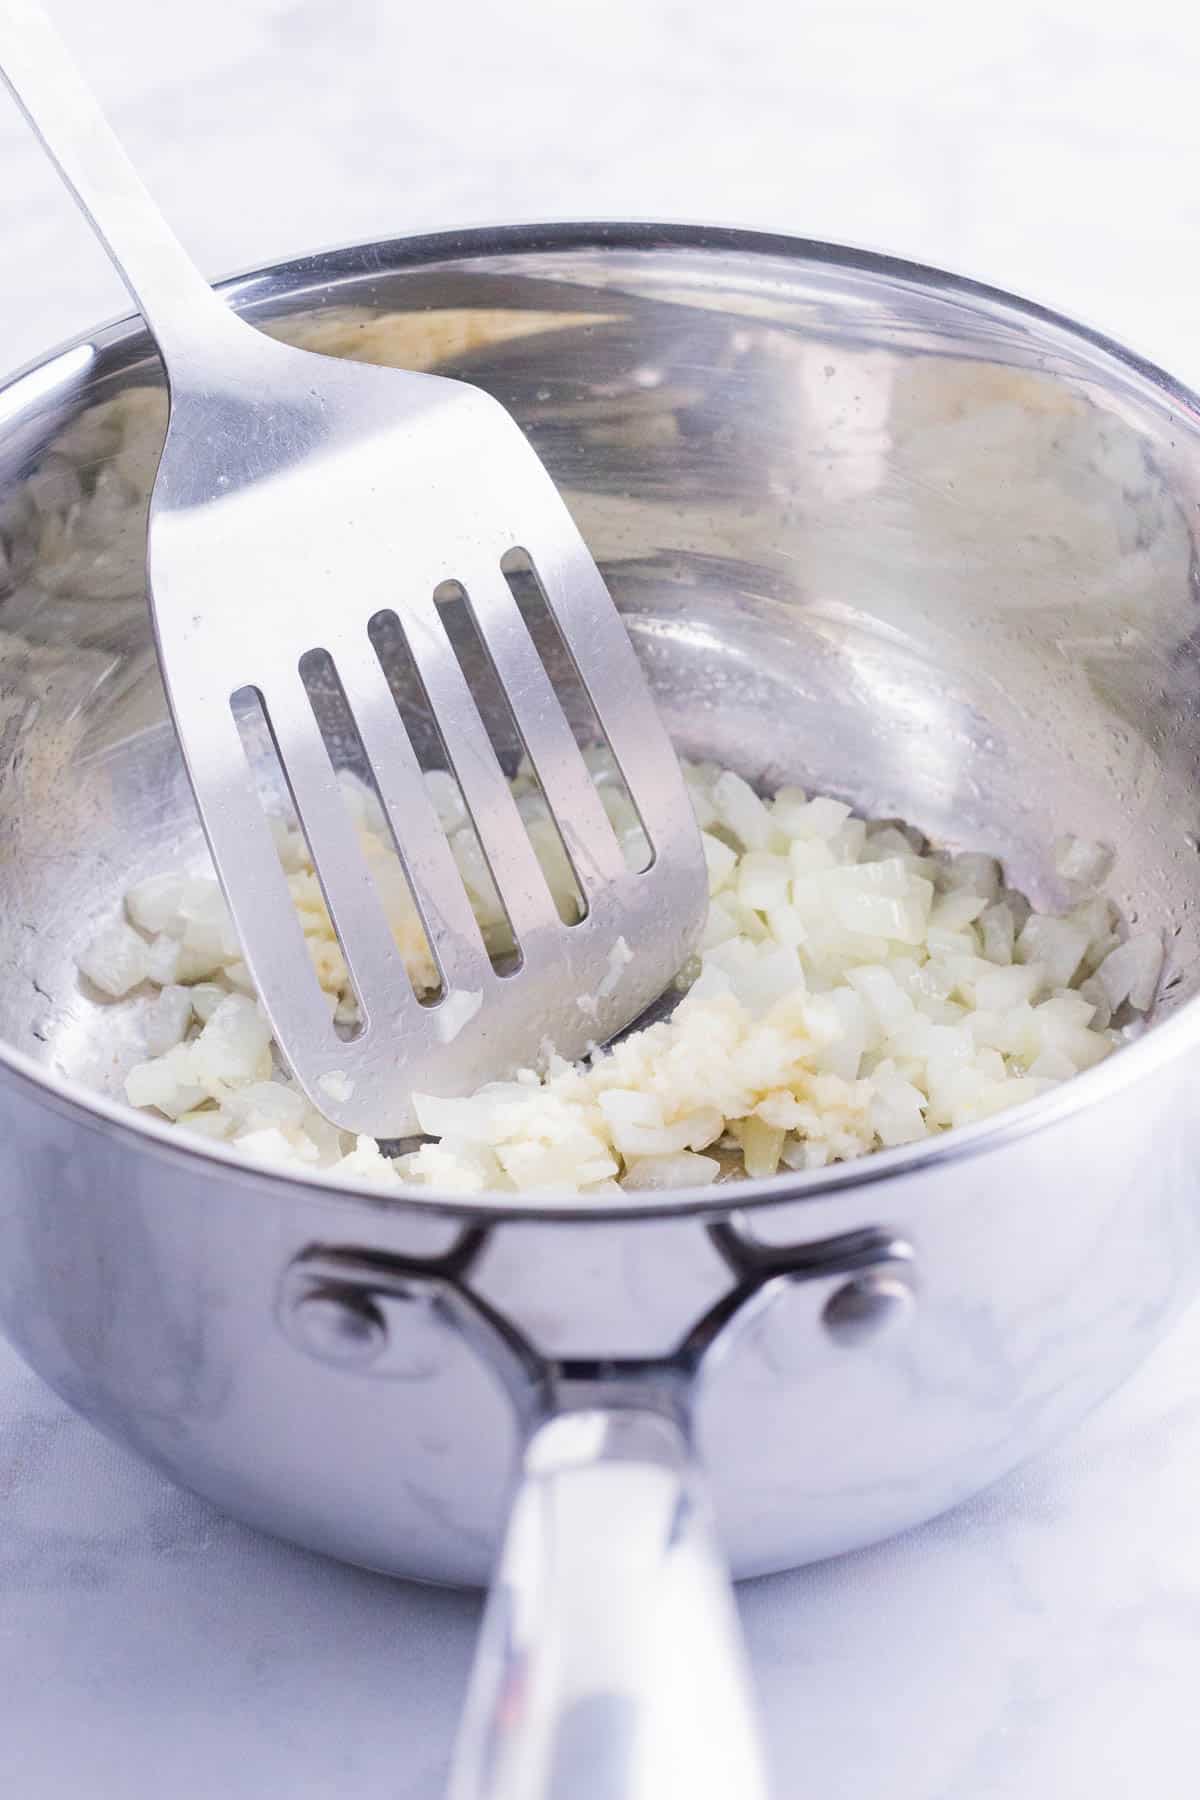 Garlic is added to the sauteed onion.